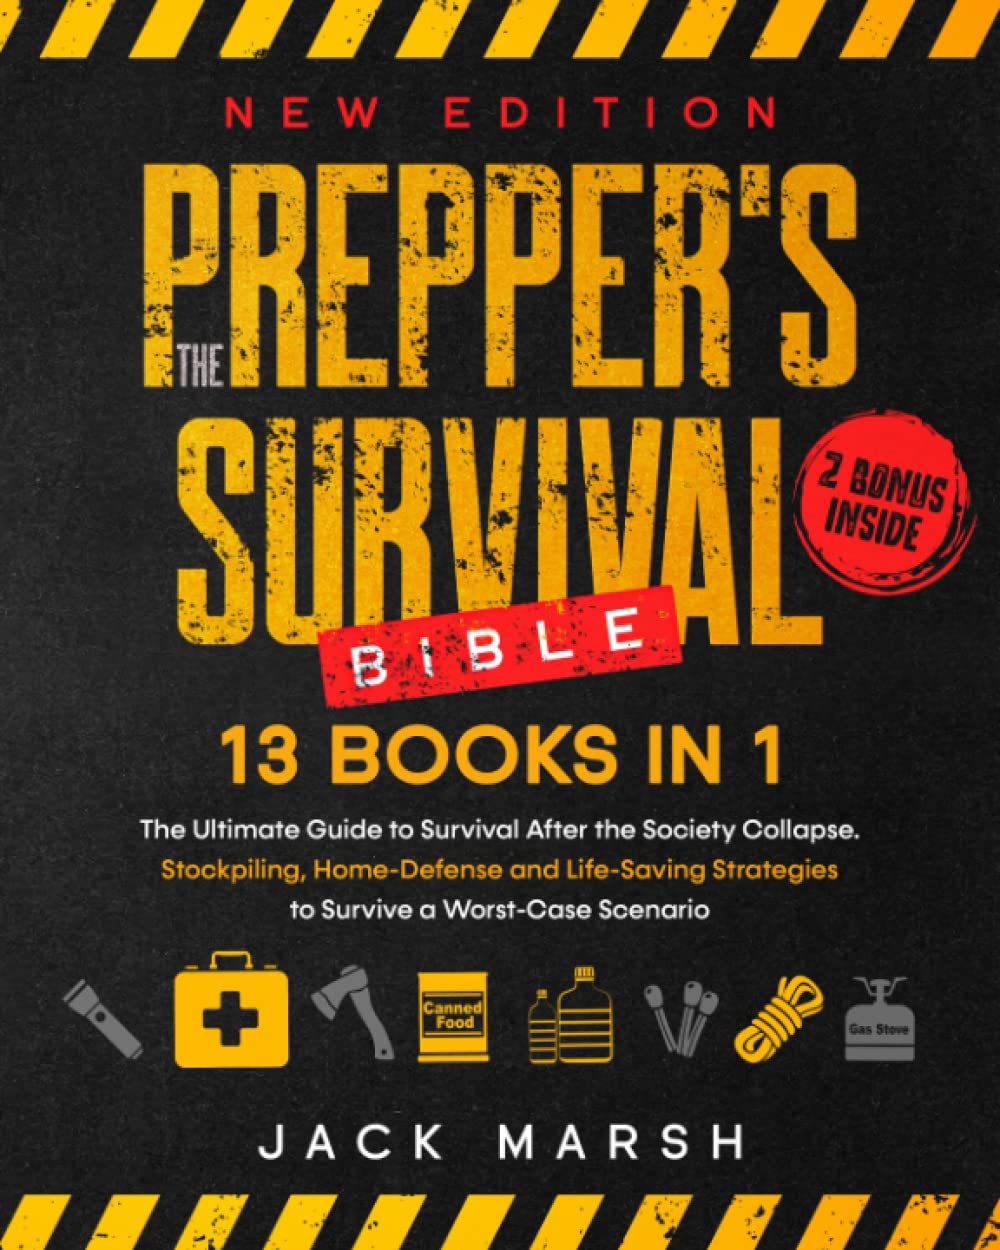 The Prepper’s Survival Bible: The Ultimate Guide to Survival After the Society Collapse. Stockpiling, Home-Defense and Life-Saving Strategies to Survive a Worst-Case Scenario